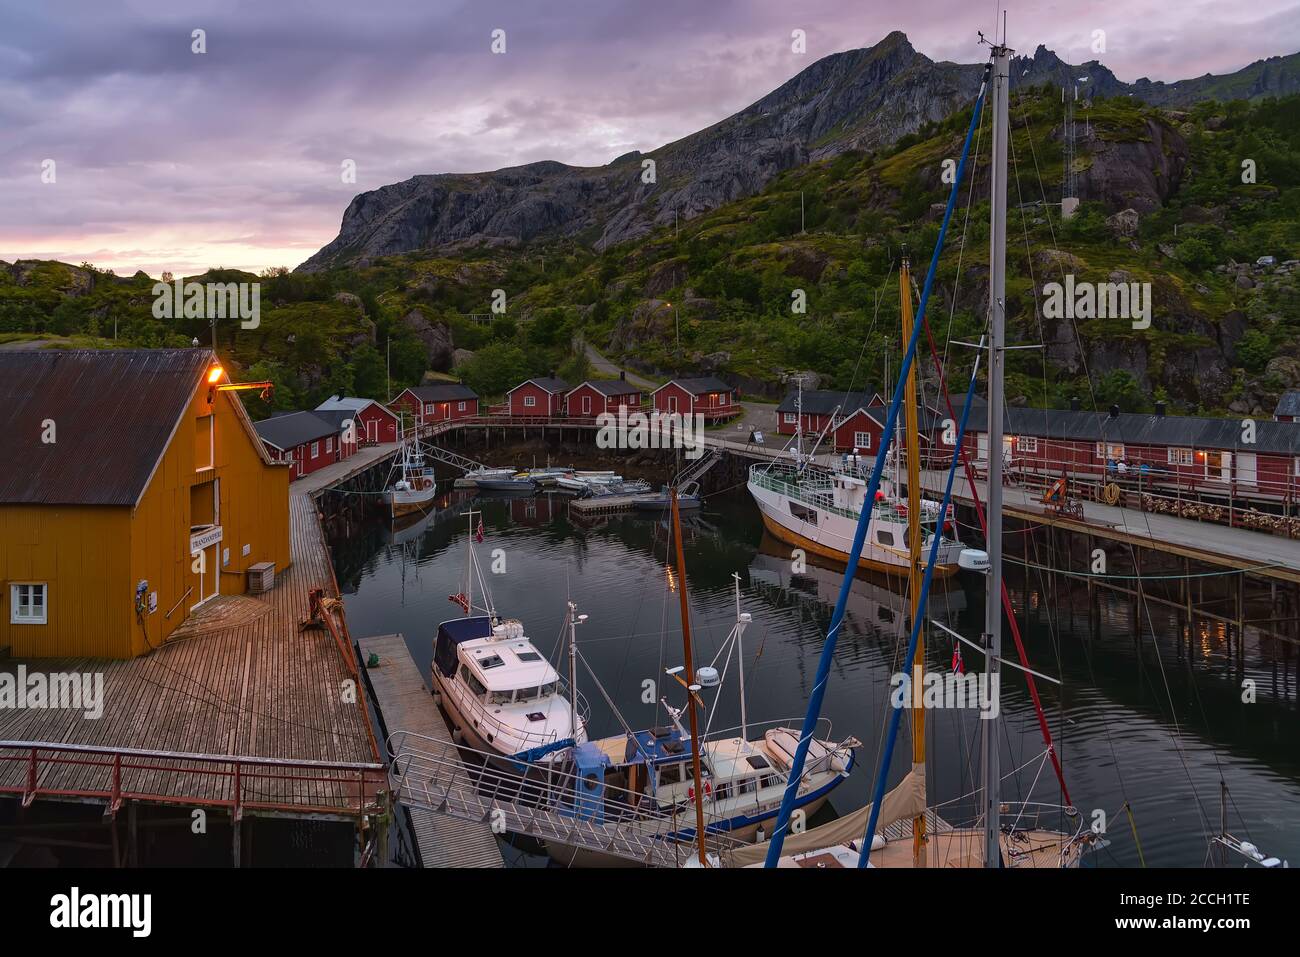 Nusfjord, Norway - August 20, 2016: View of the harbor at sunset. Nusfjord is one of the oldest and best preserved fishermen village of Norway Stock Photo